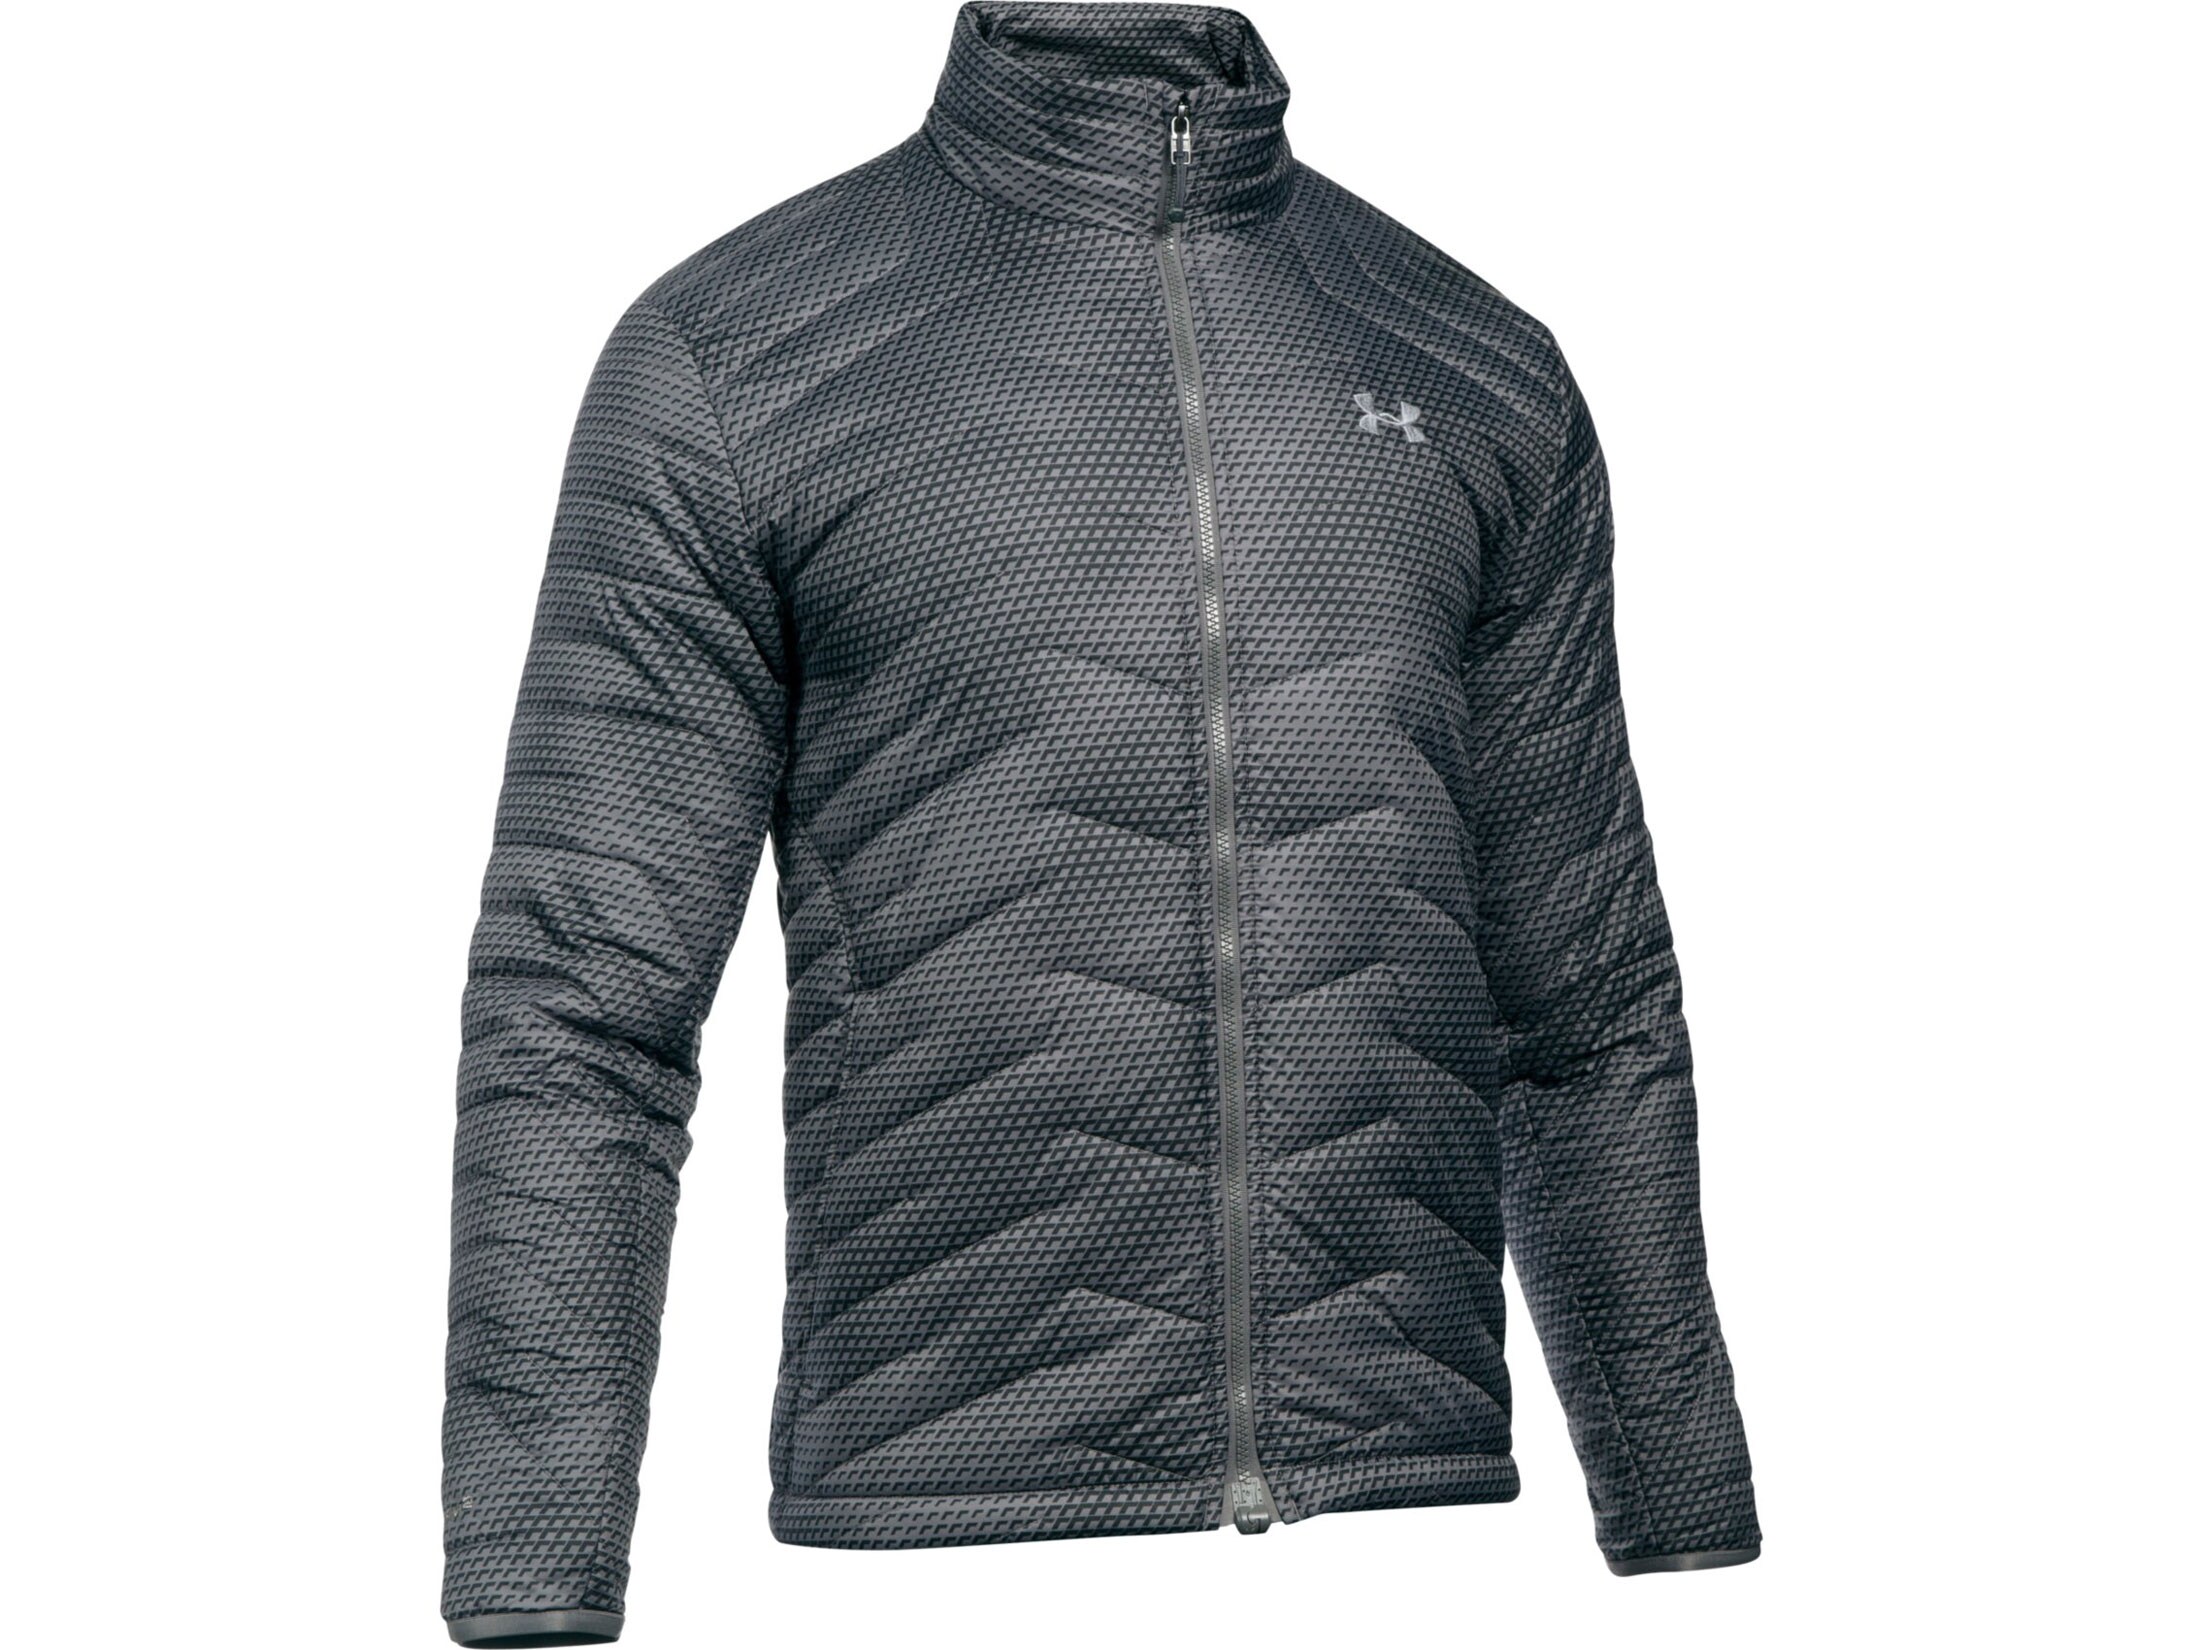 Under Armour Men's UA ColdGear Reactor Insulated Jacket Polyester